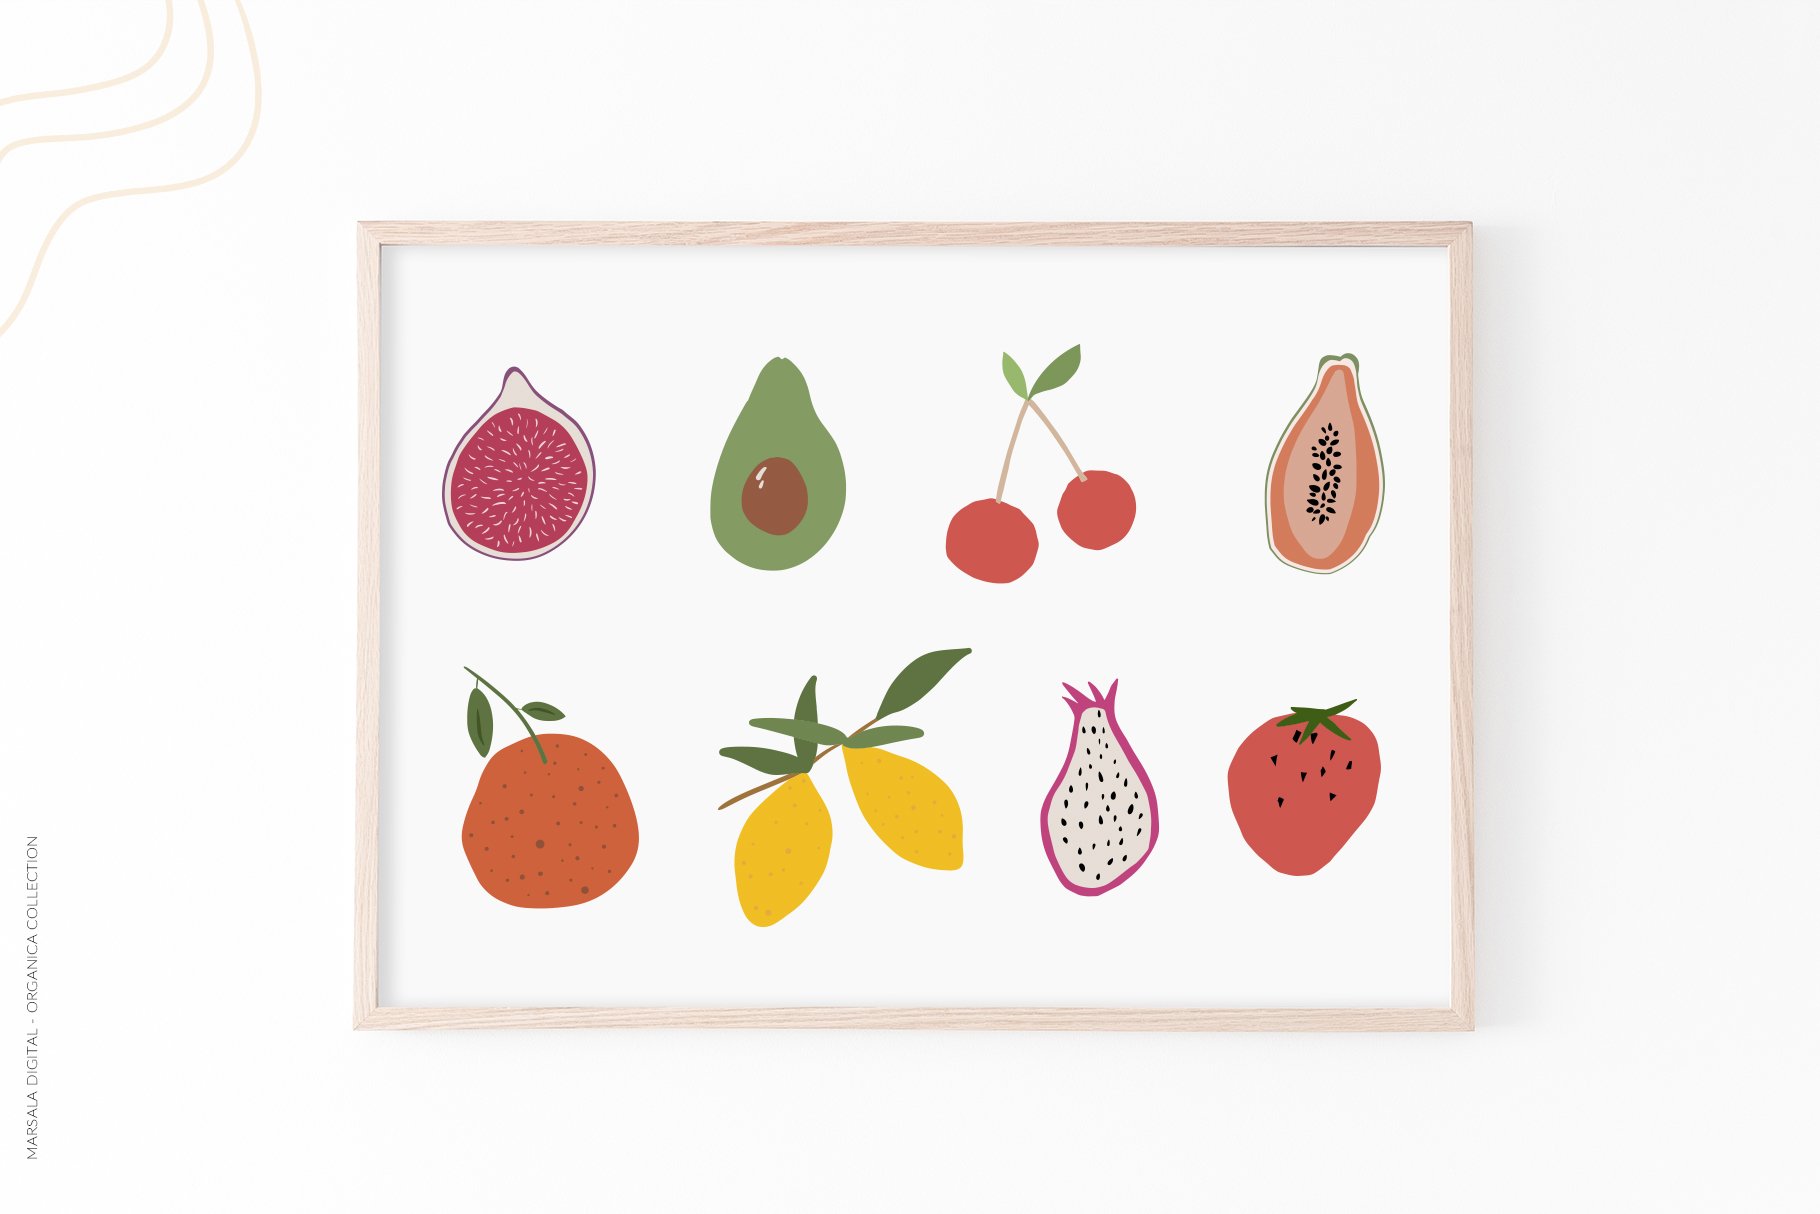 Abstract Fruit Shapes Art Print Elements Graphic by Musbila